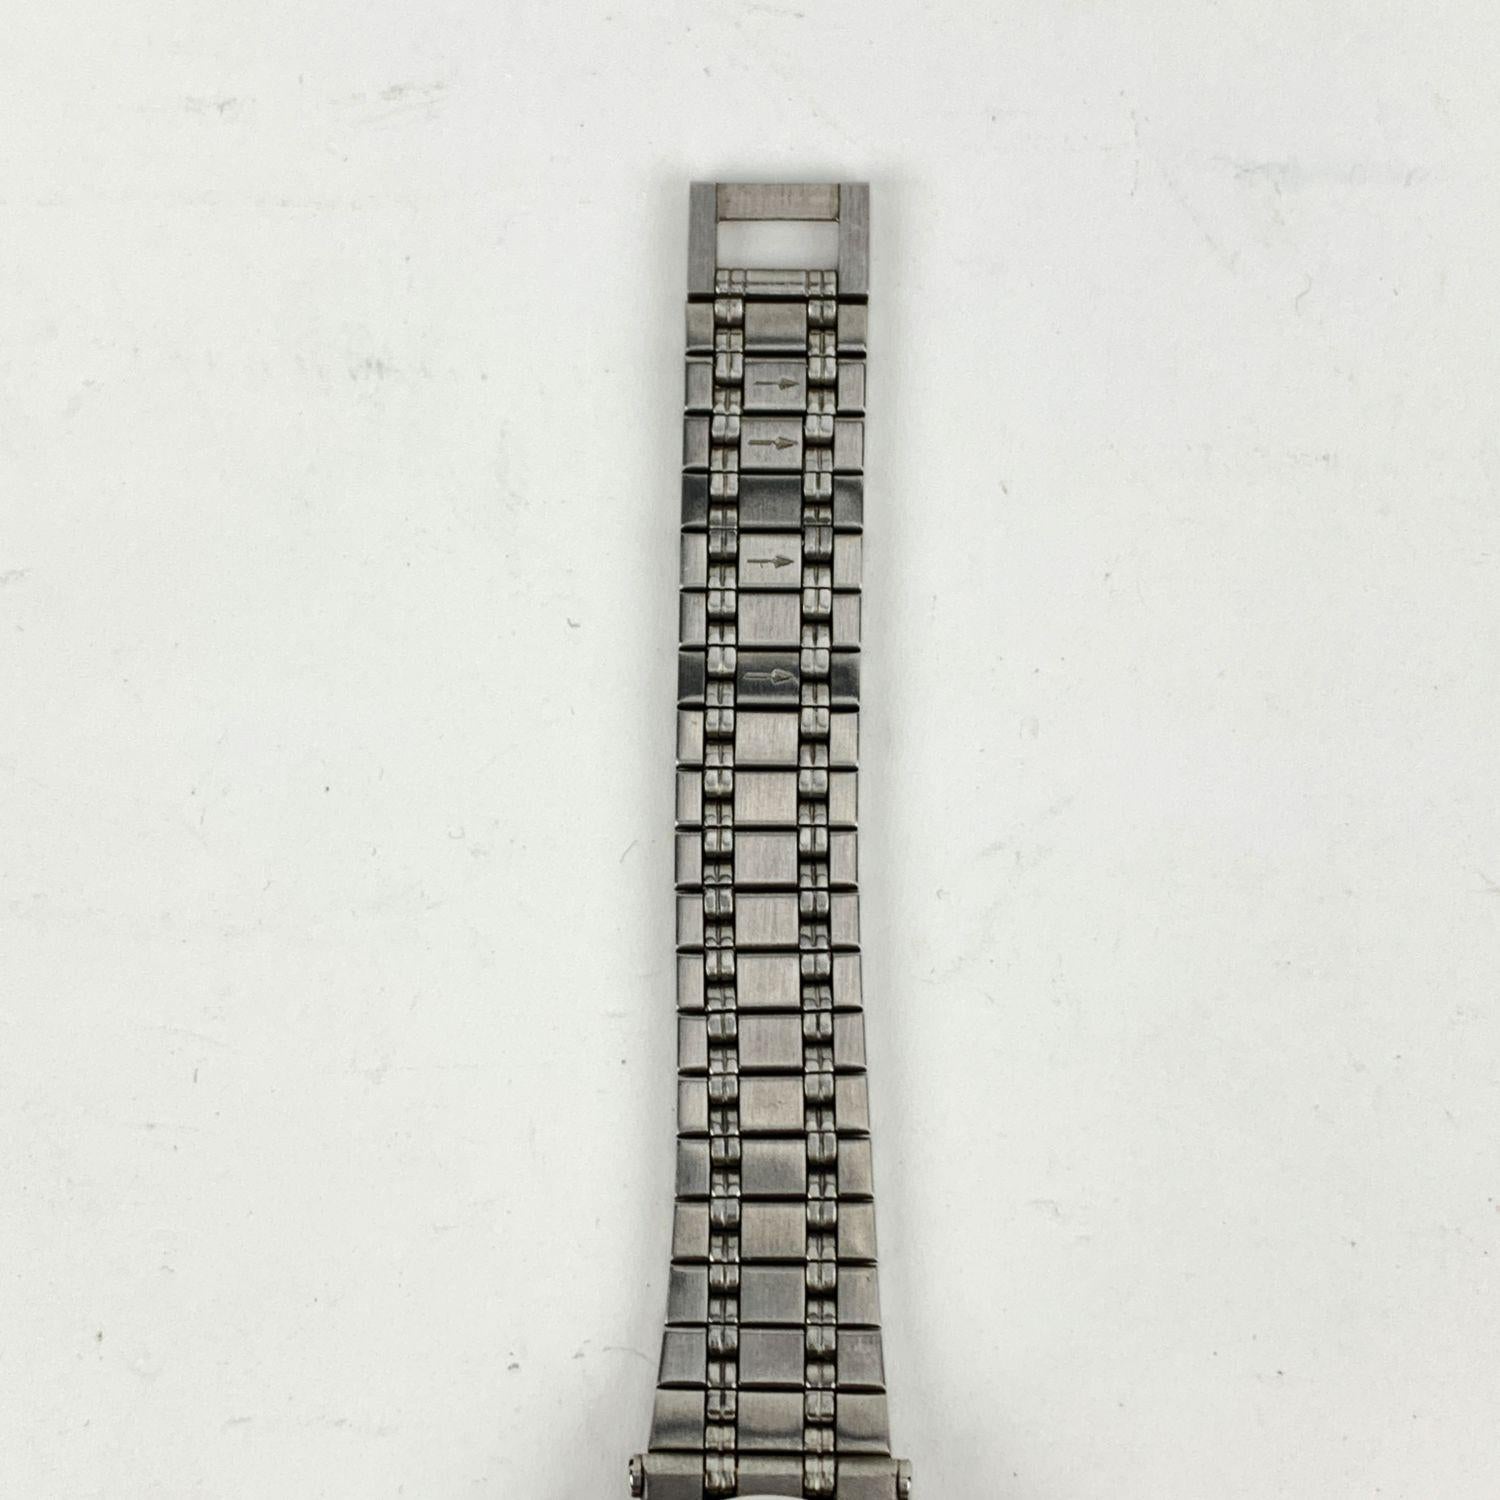 Gucci Vintage Stainless Steel Mod 9100 L Wrist Watch Black Dial 3